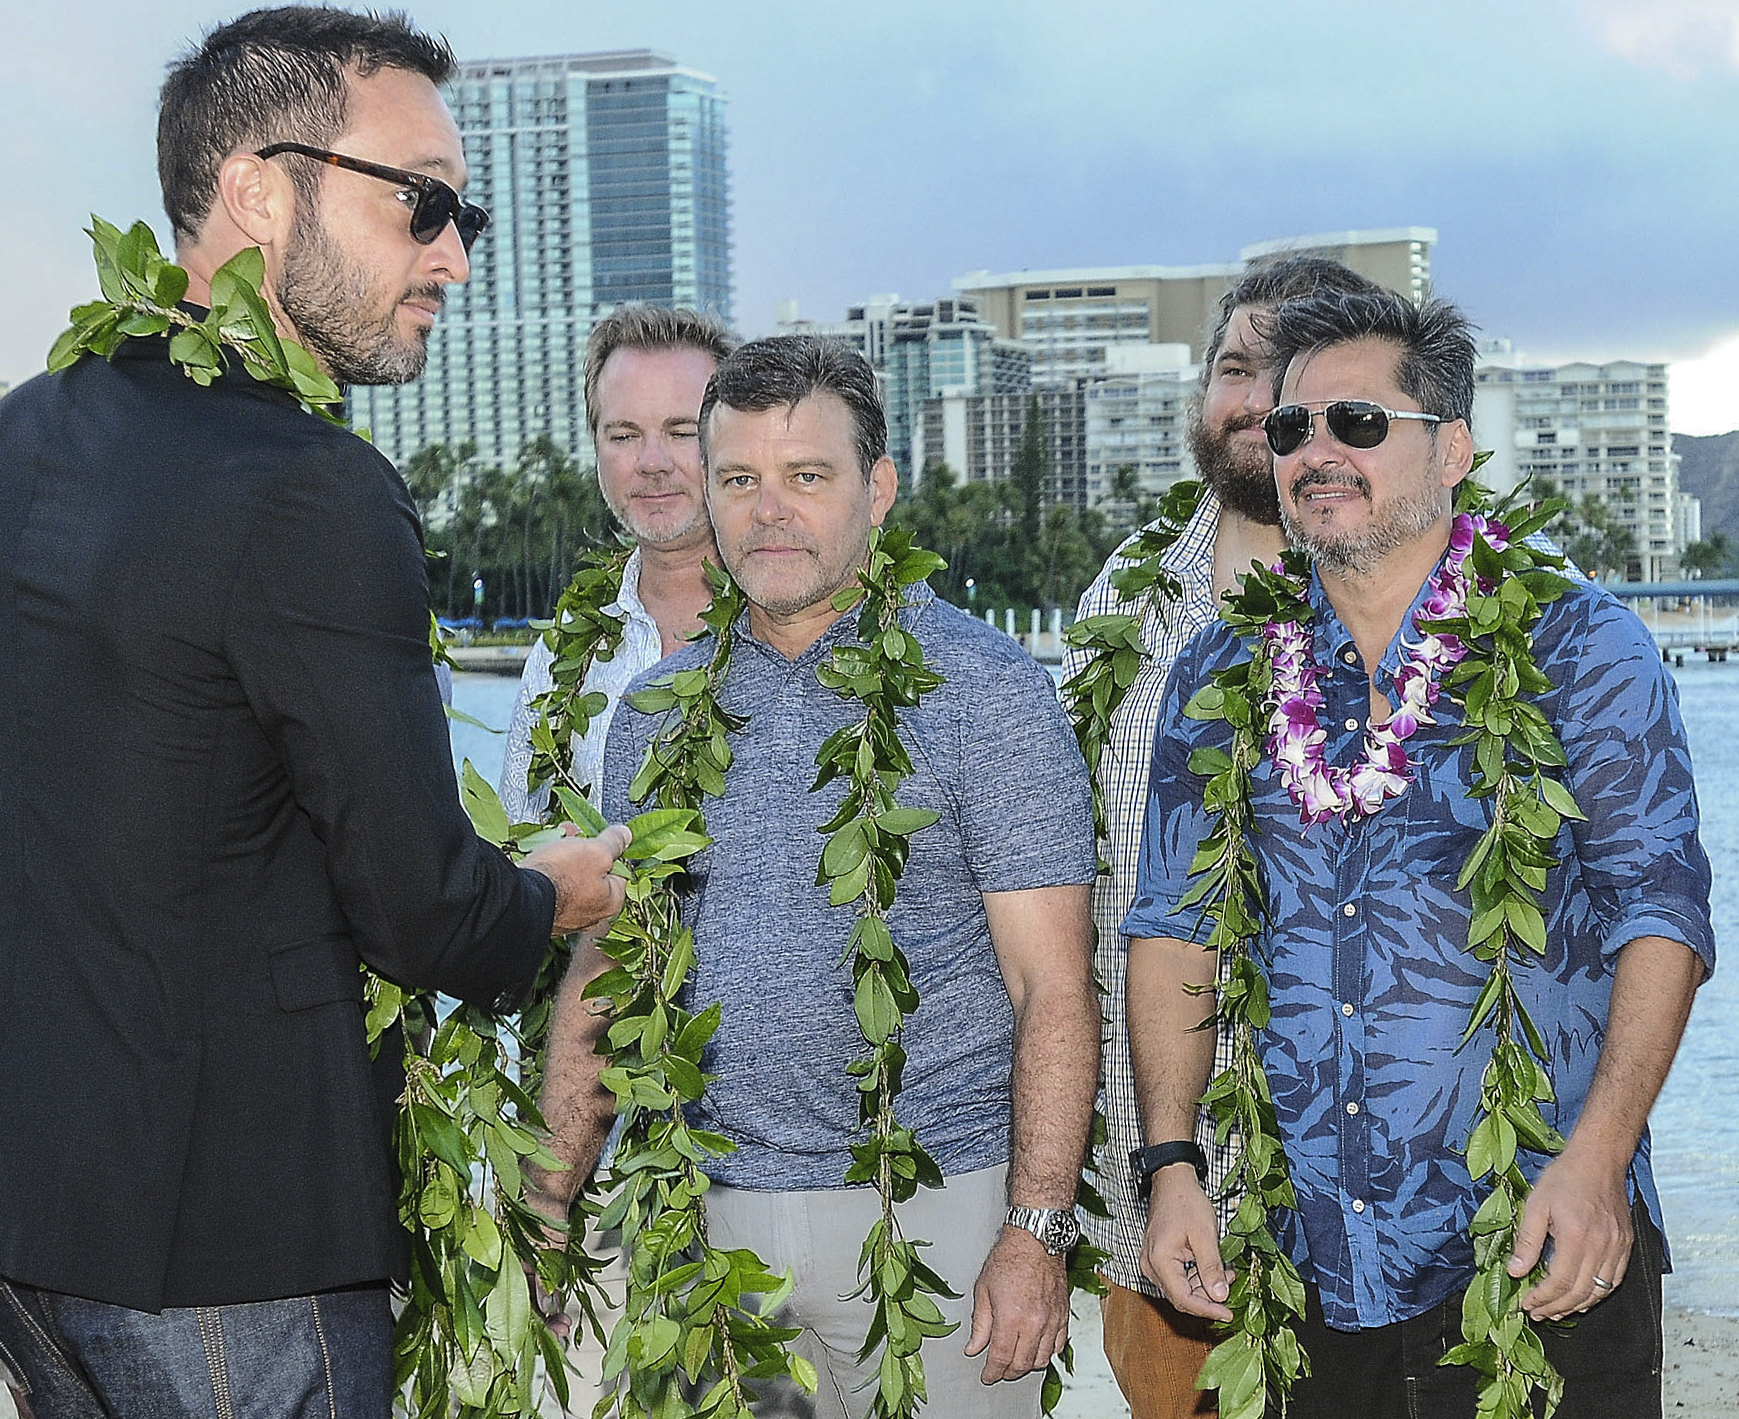 In the spirit of their host culture, the cast and crew of Hawaii Five-0 gathered for their annual blessing ceremony.